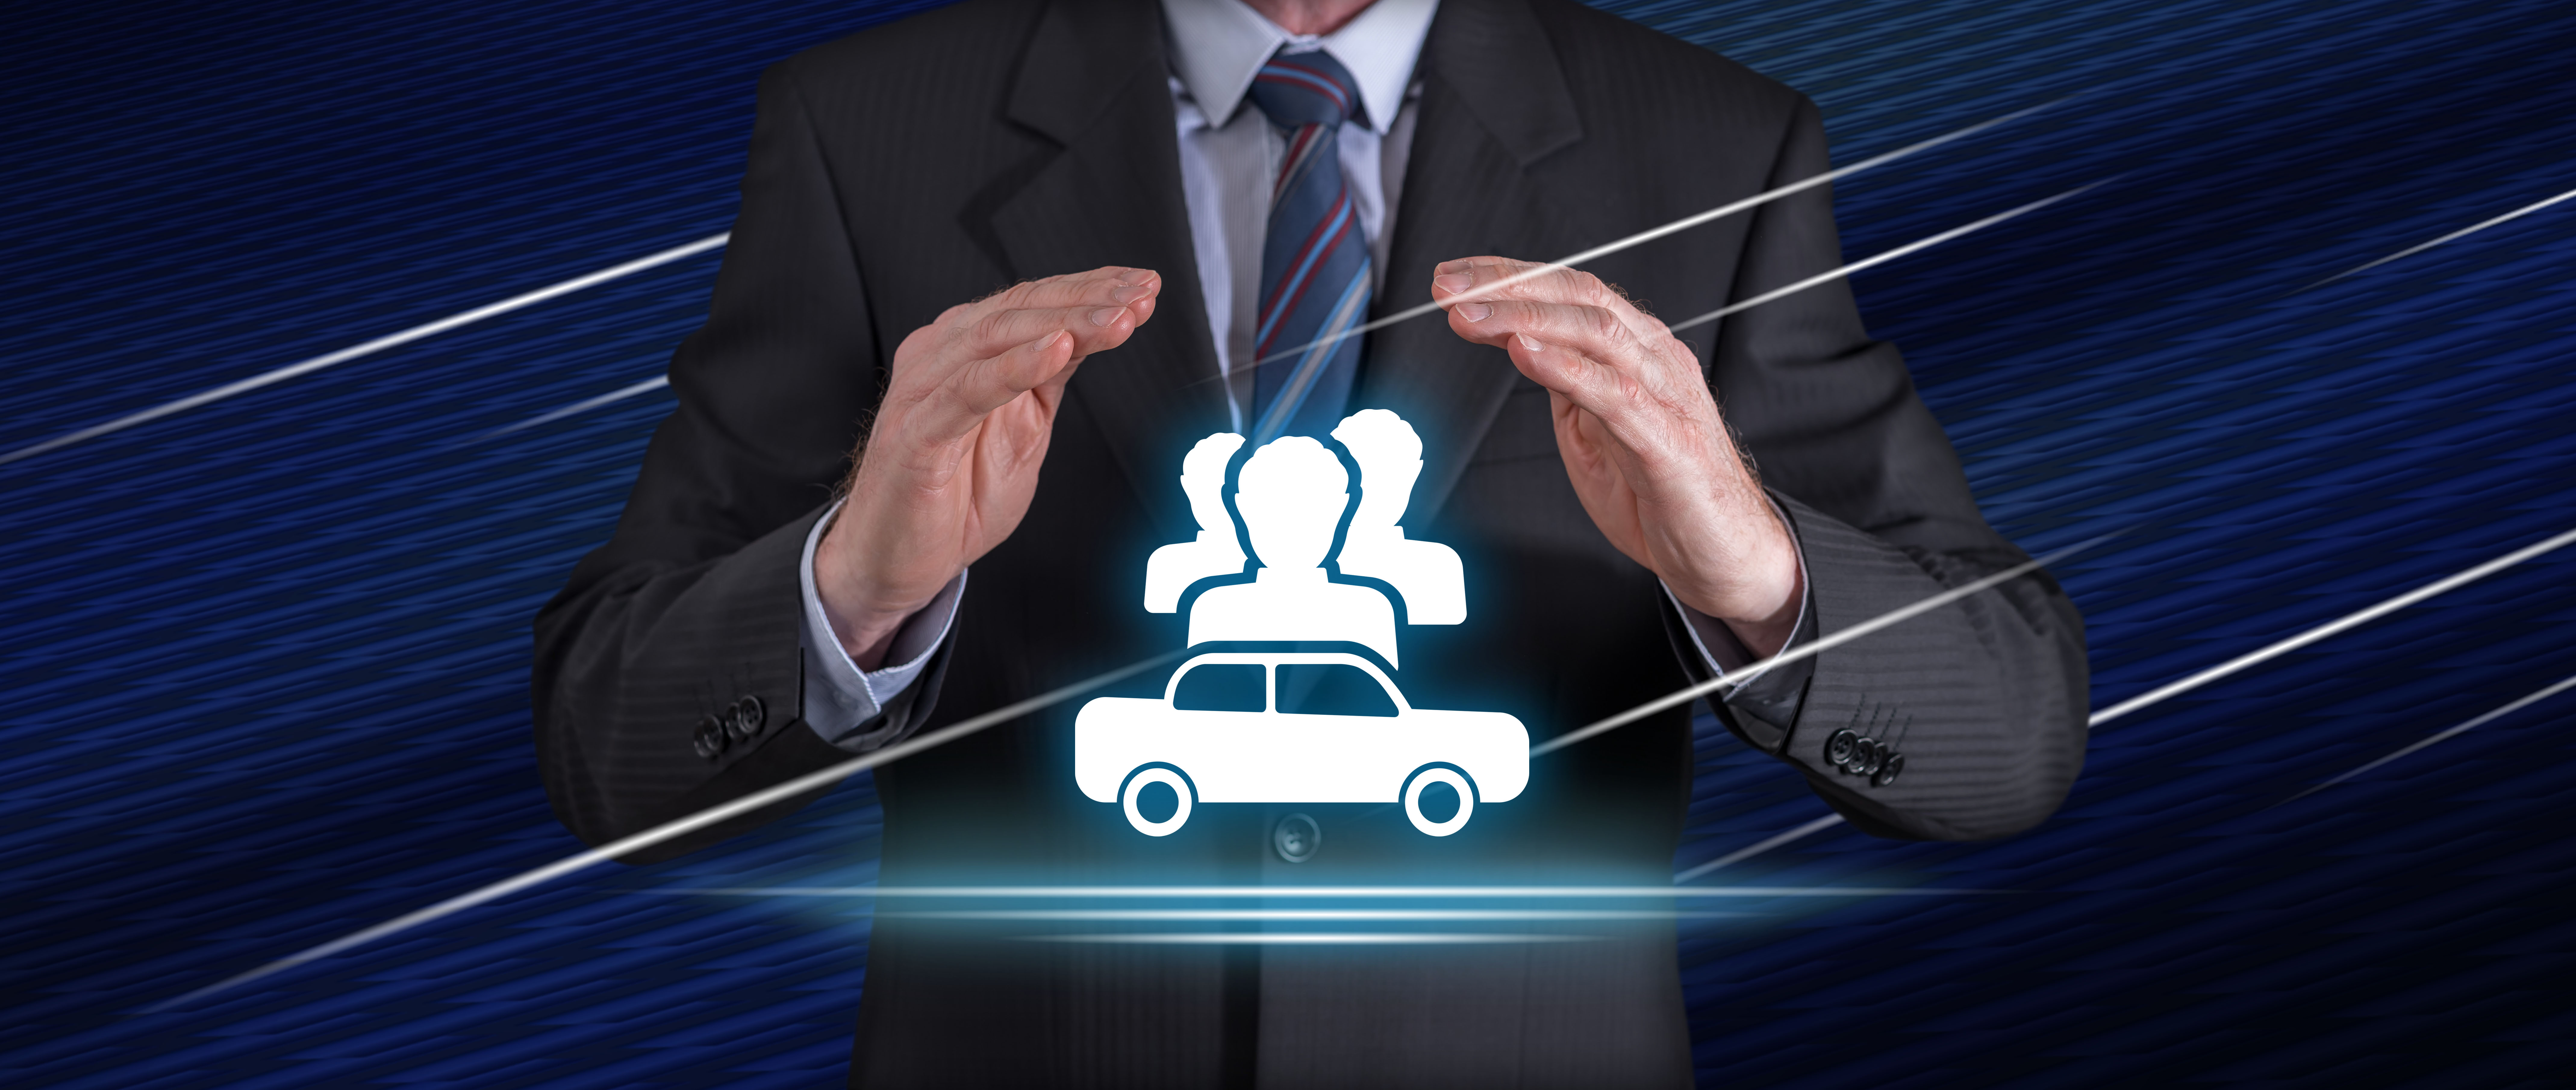 Rideshare Insurance for Florida Drivers—What Does it Cover?